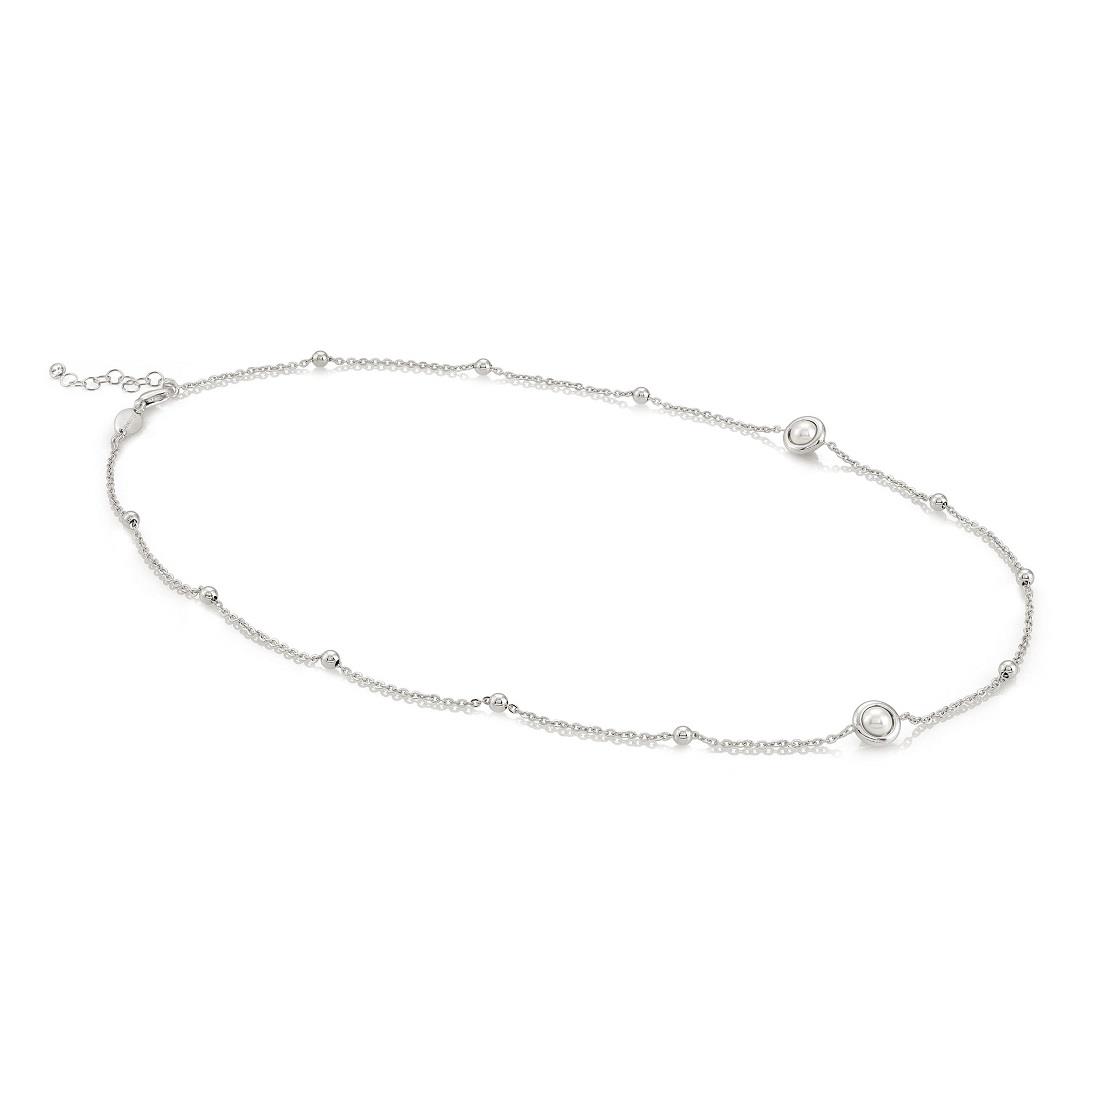 Necklace in silver and pearls - NOMINATION